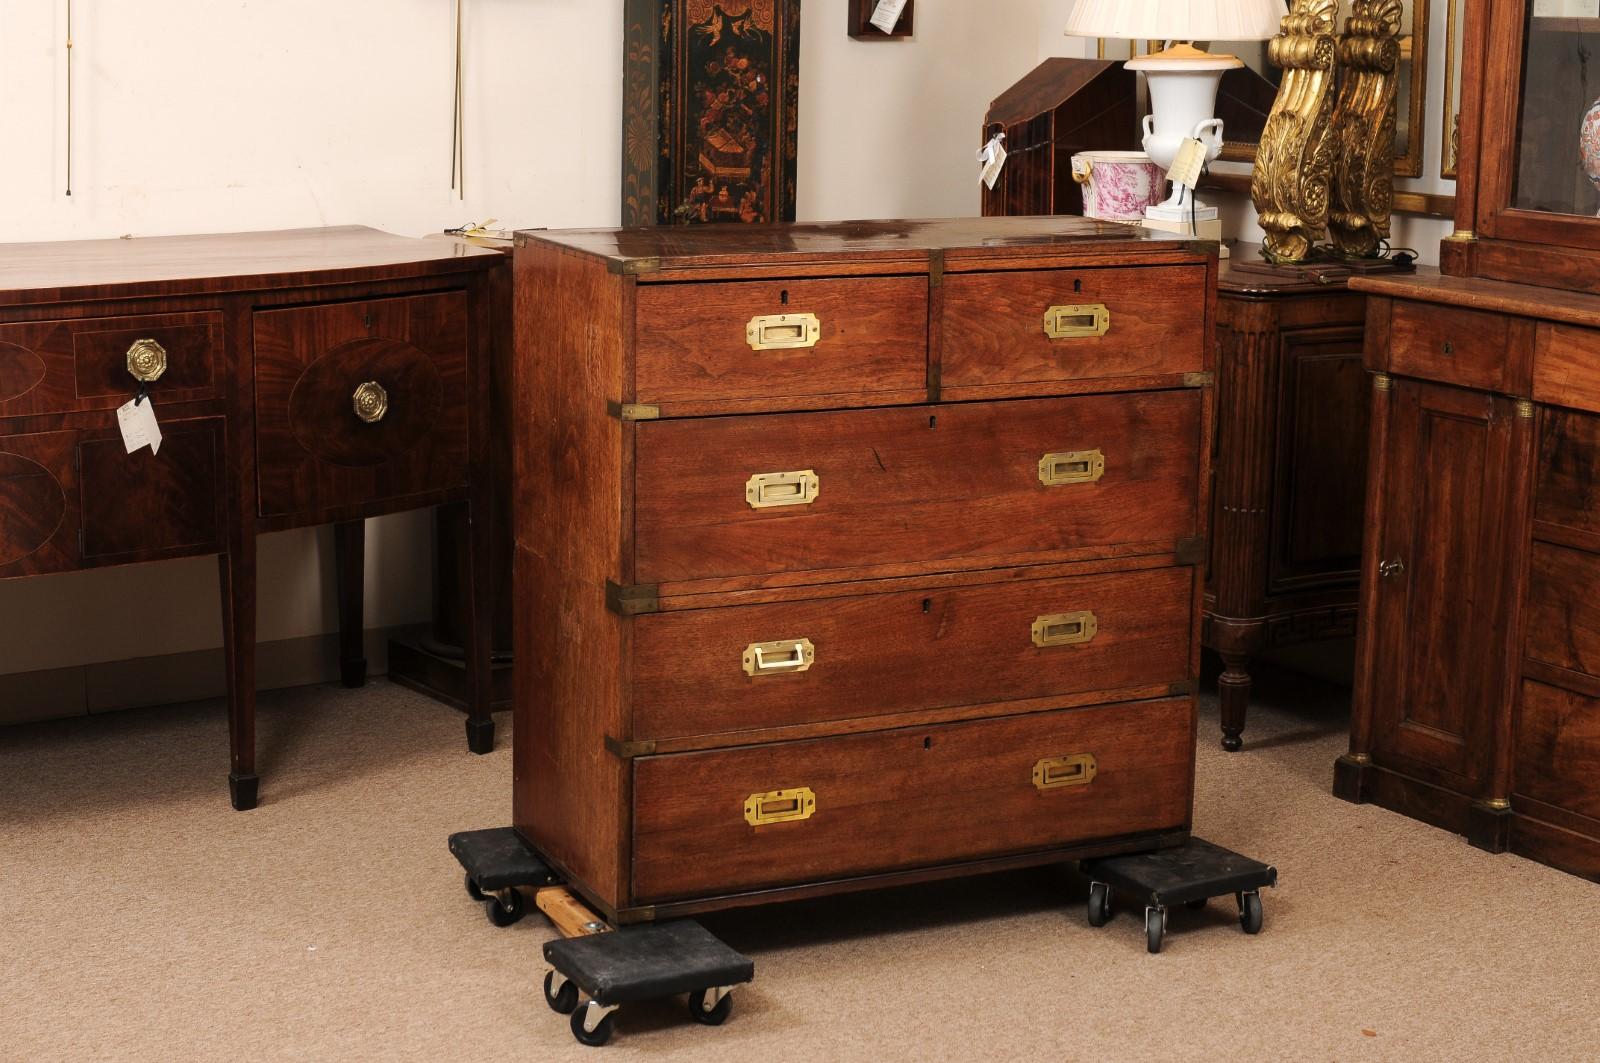 Late 19th Century English Teak Campaign Chest with Brass Mounts & 5 Drawers In Fair Condition For Sale In Atlanta, GA